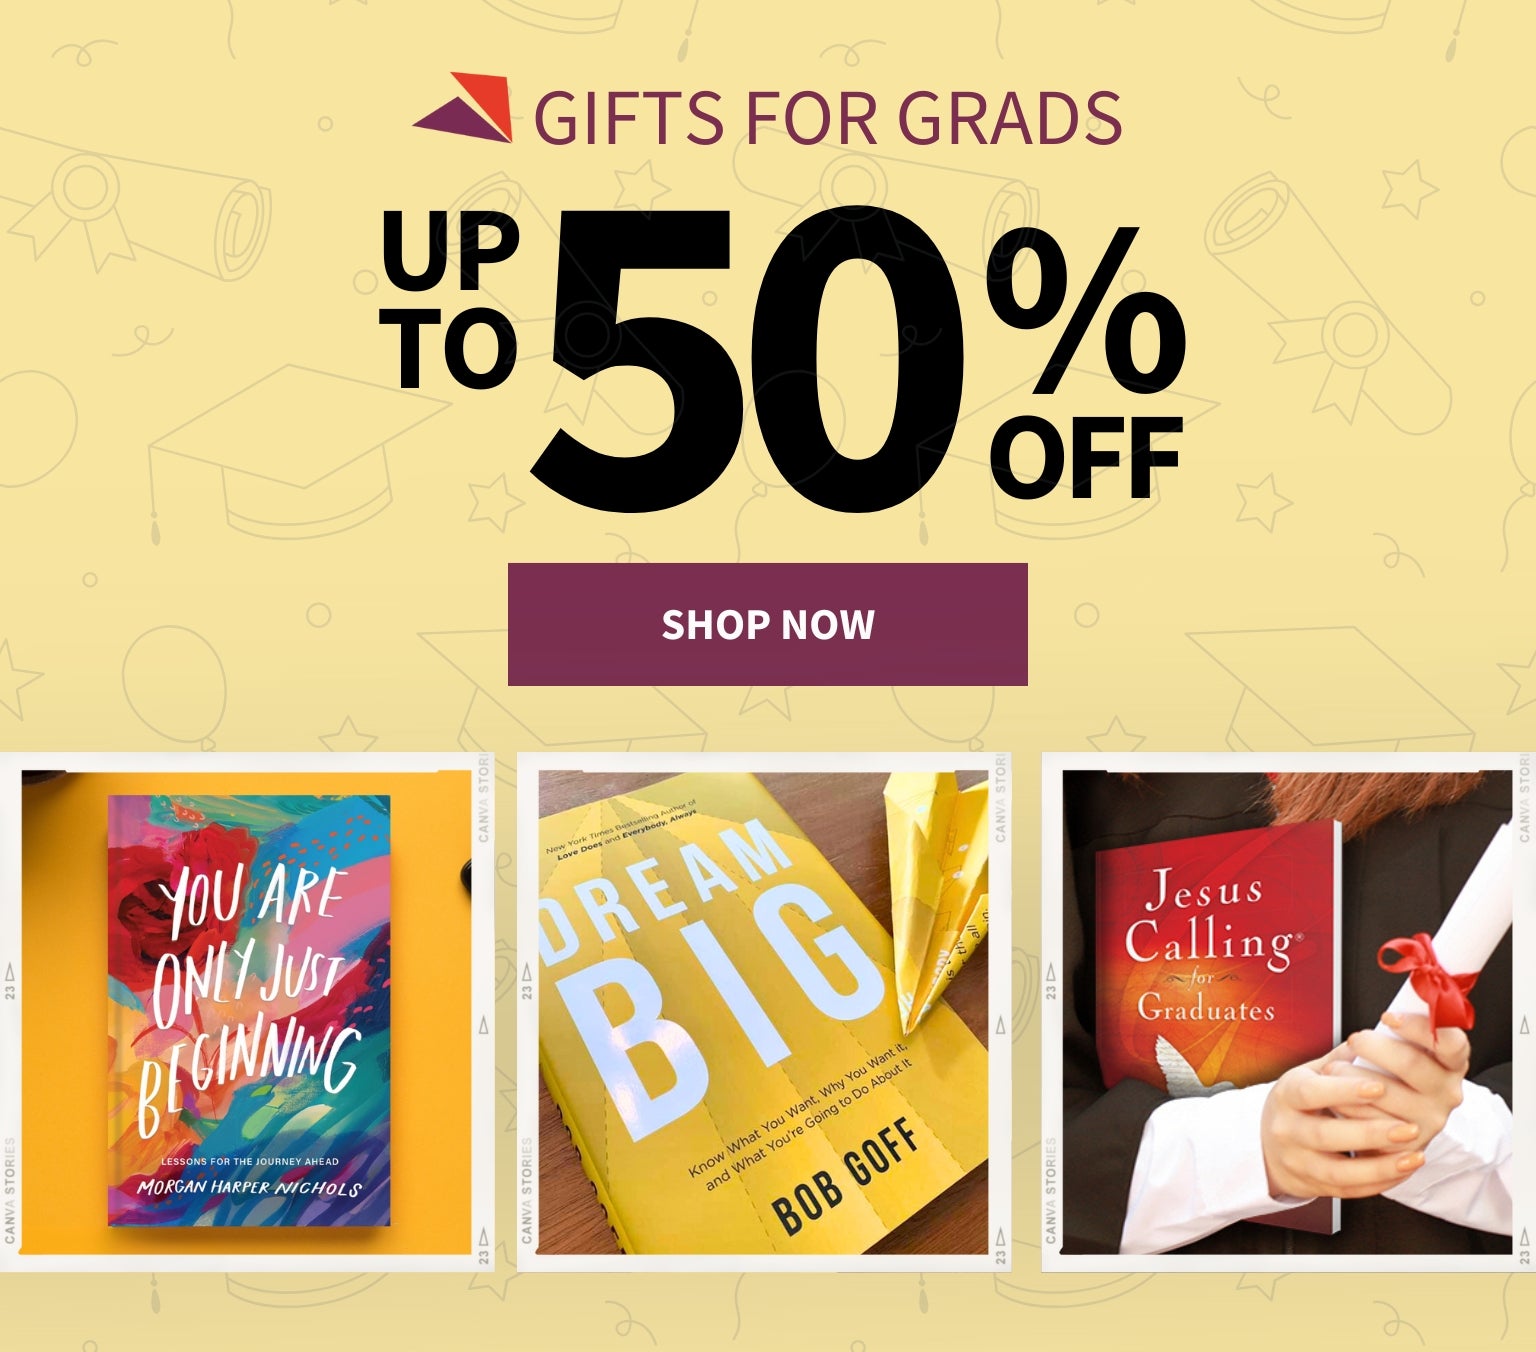 Gifts for Grads Up to 50% off